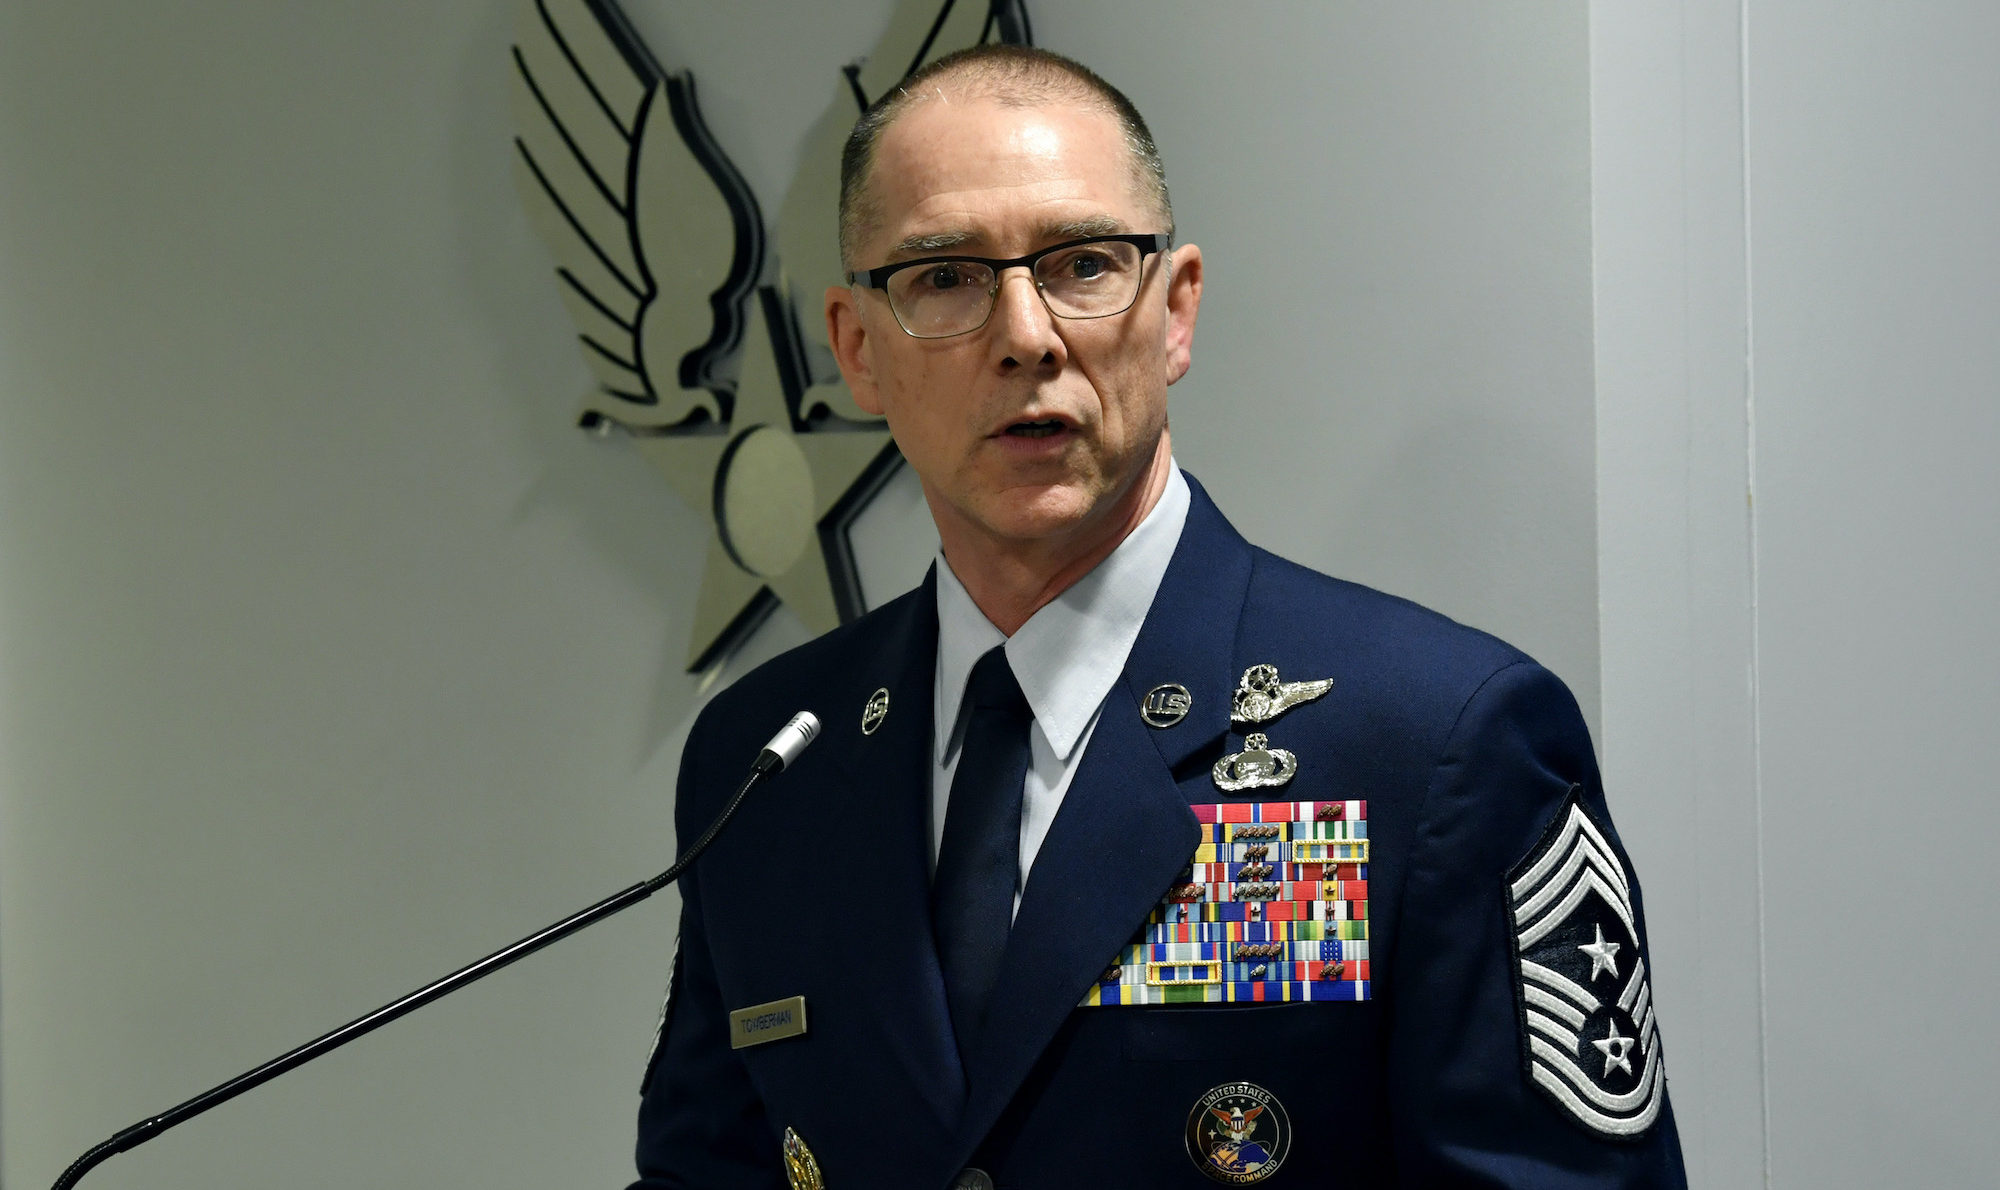 Top enlisted leader Towberman to officially join the U.S. Space Force